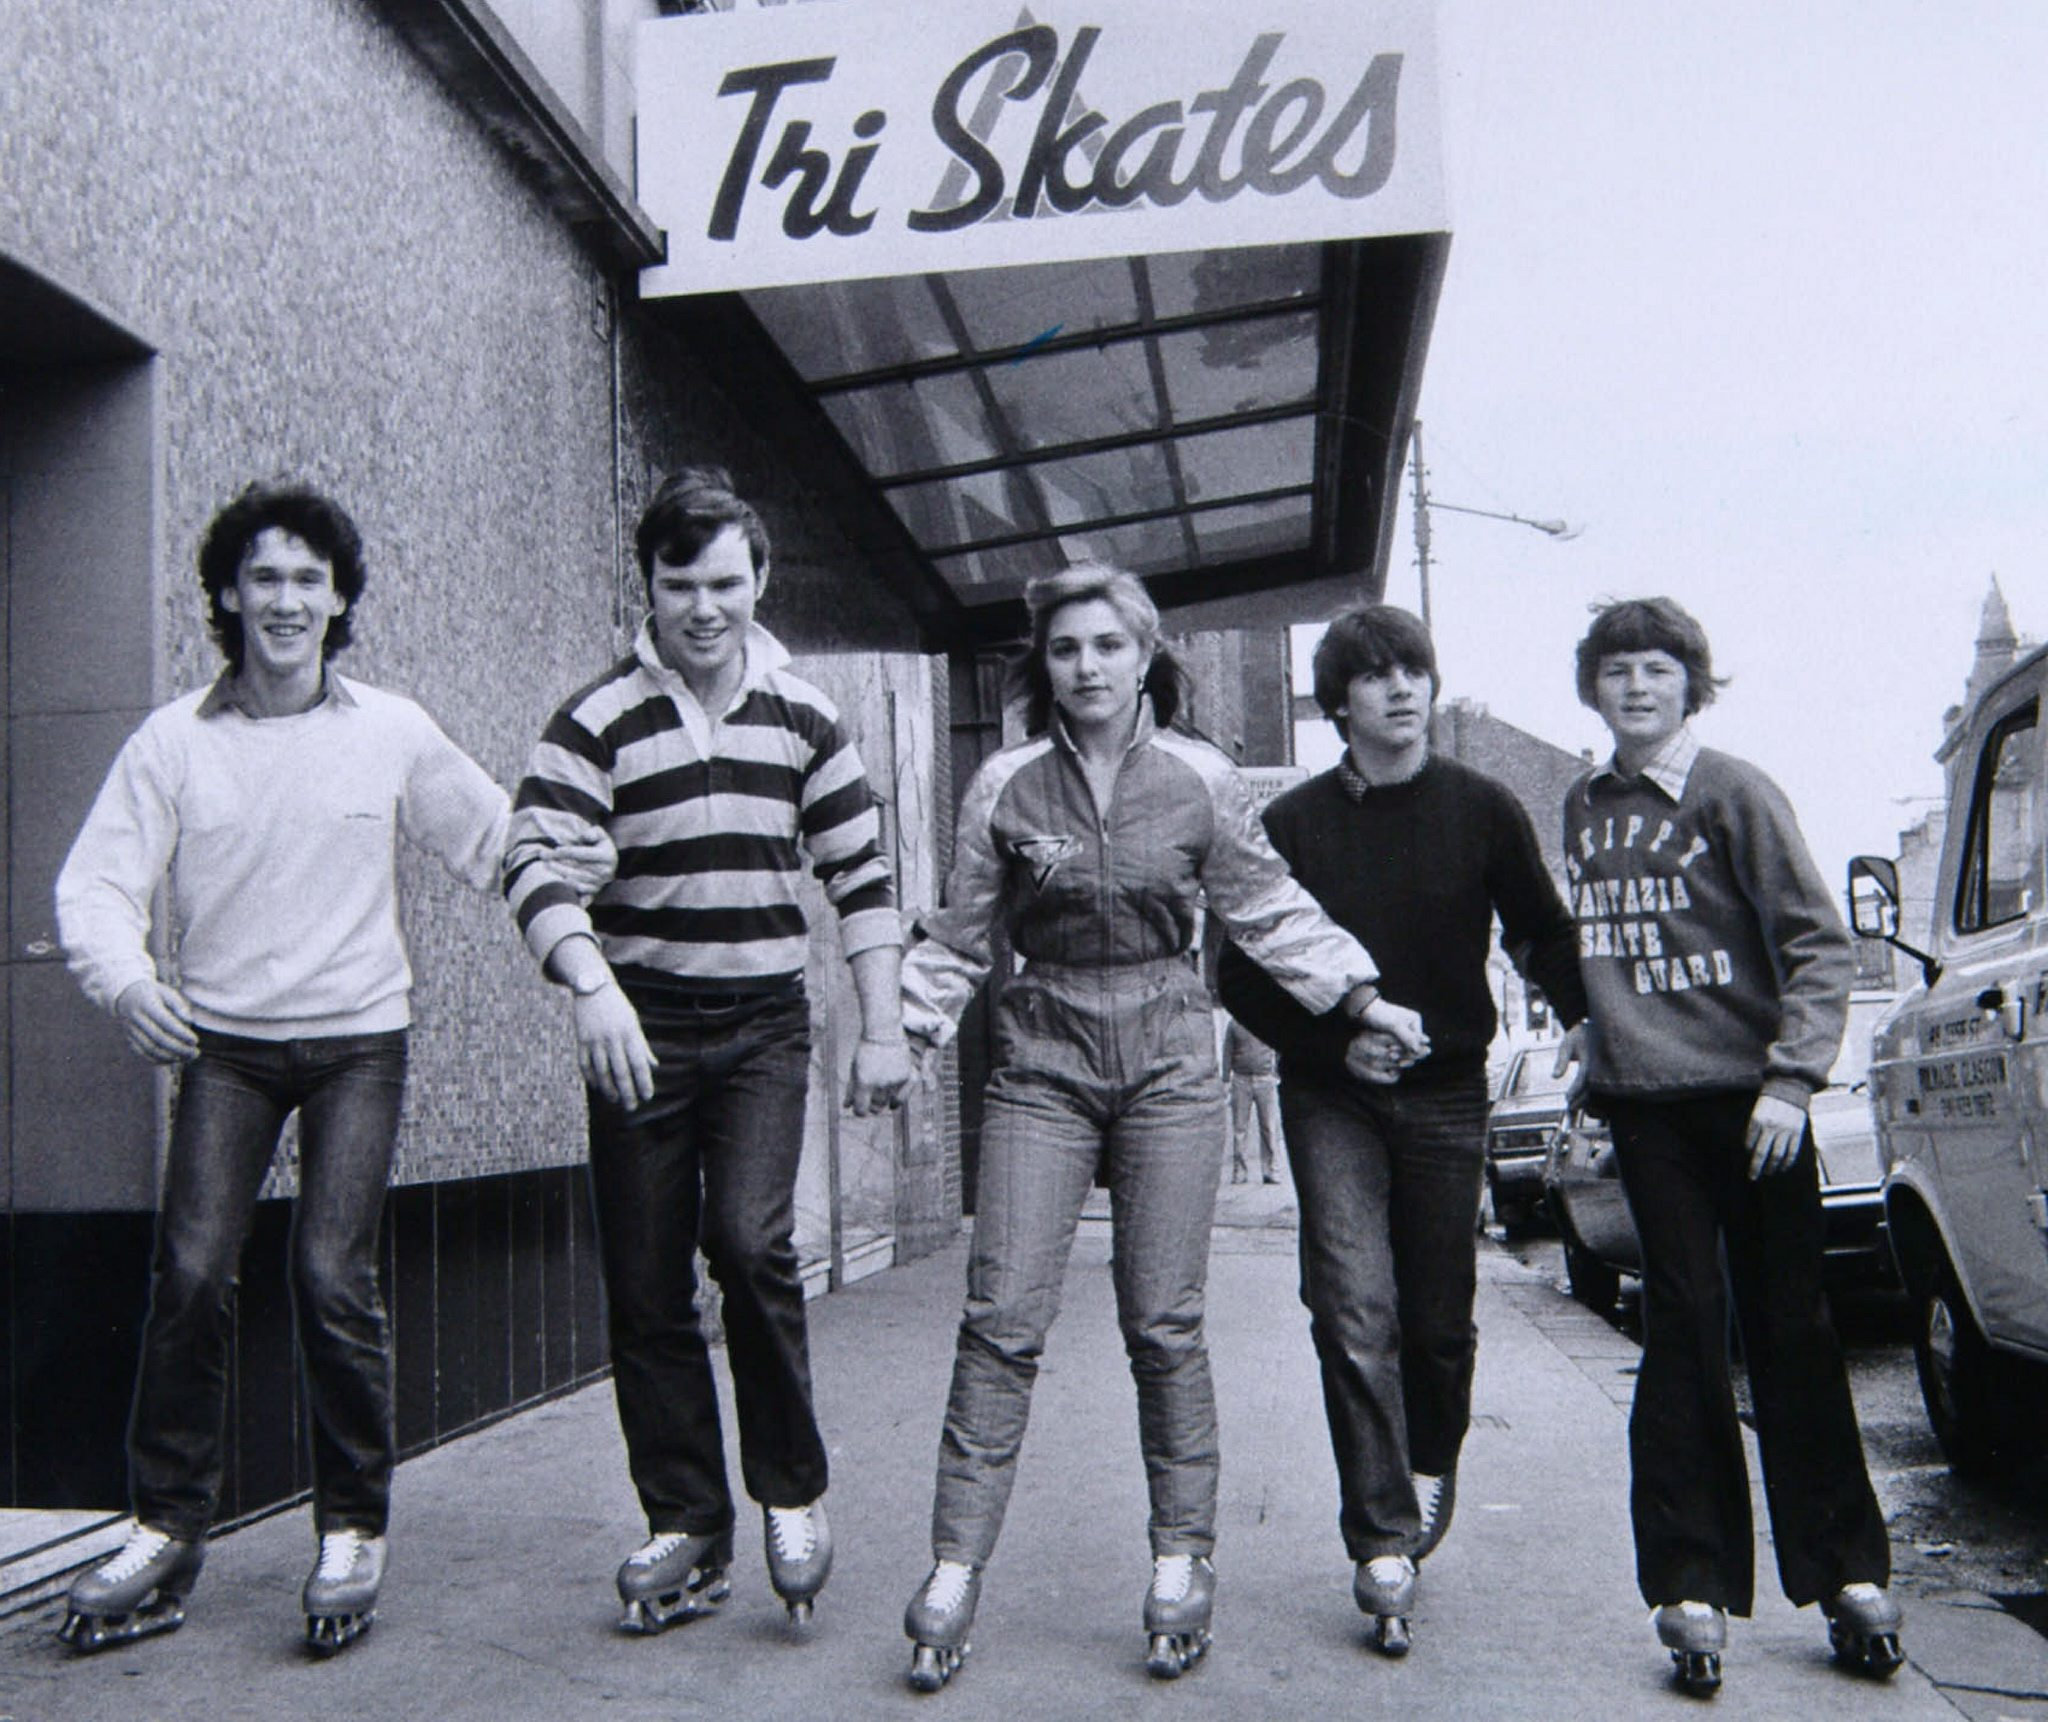 Tri-skating at the Barrowland in 1981 - Jack Cunningham, Duncan Boyd, Morena Pellicci, Marko Pellicci and Alex Nisbet demonstrate.Pic: Herald and Times